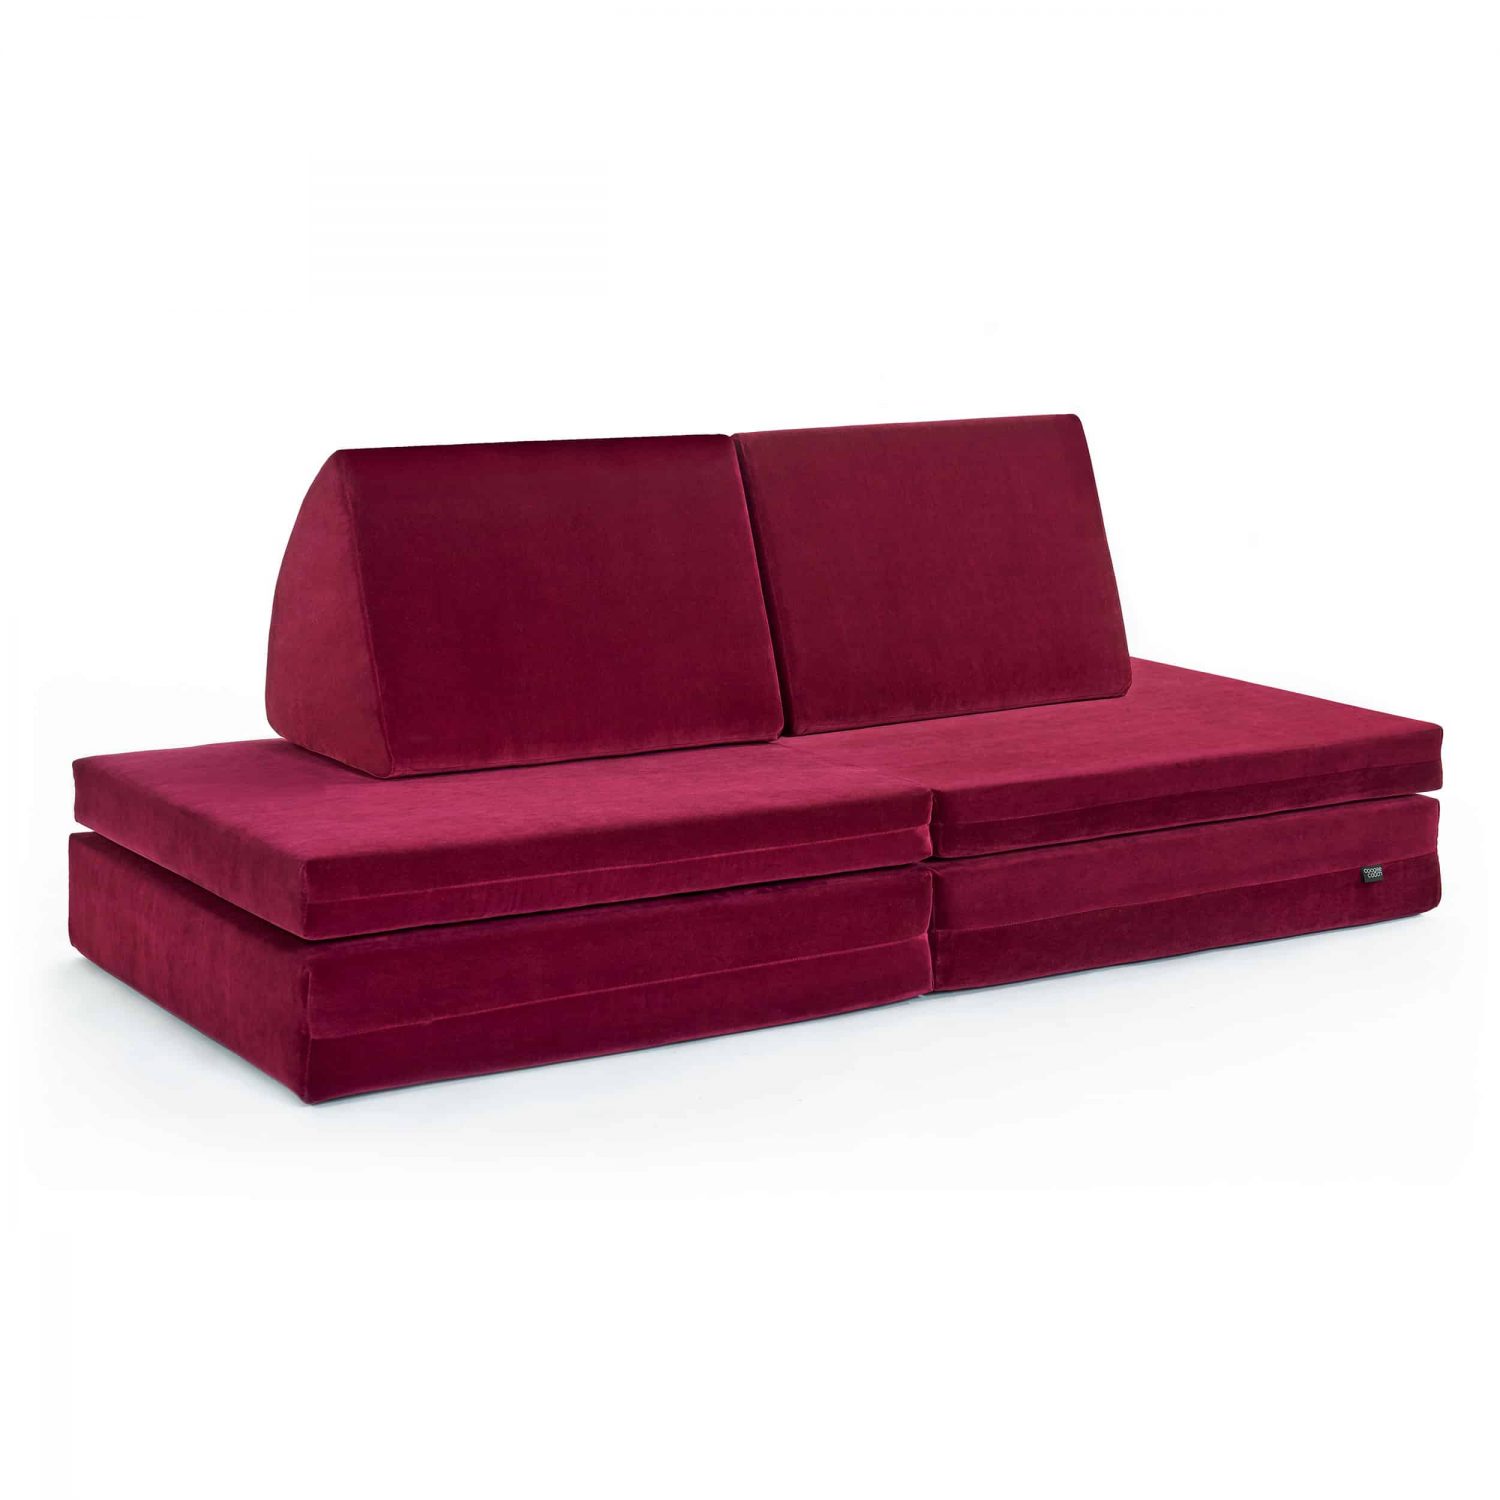 coogeecouch | Kindersofa | Serie: bloomboom | Farbe: raspberry-red dunkelrot | Ansicht: Front schräg | made in Germany